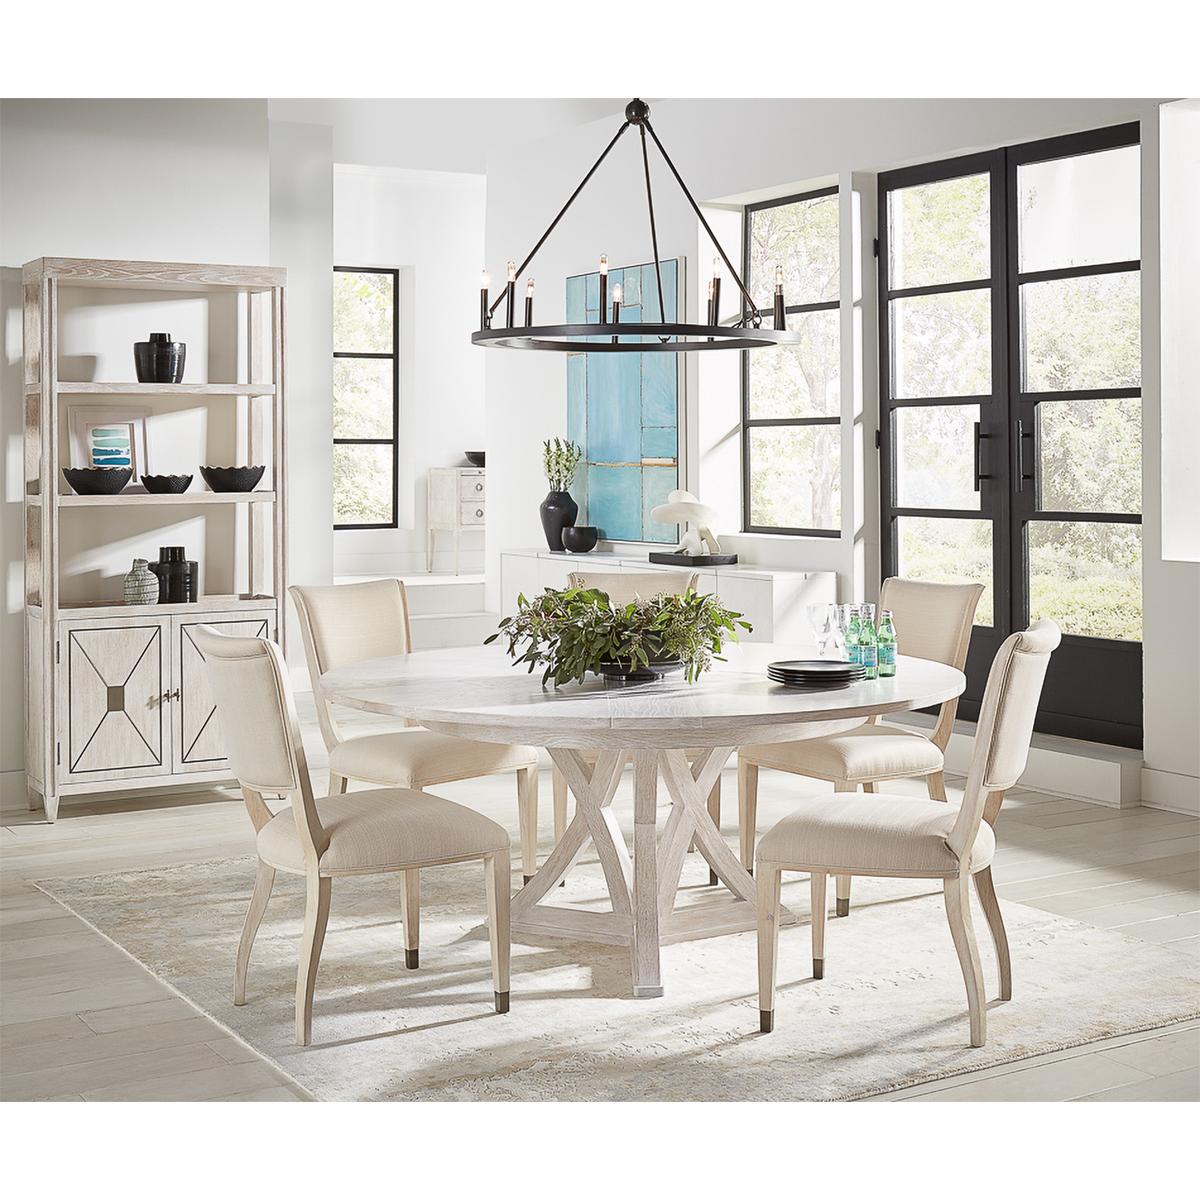 Contemporary Rustic Round Dining Table - Whitewash White For Sale